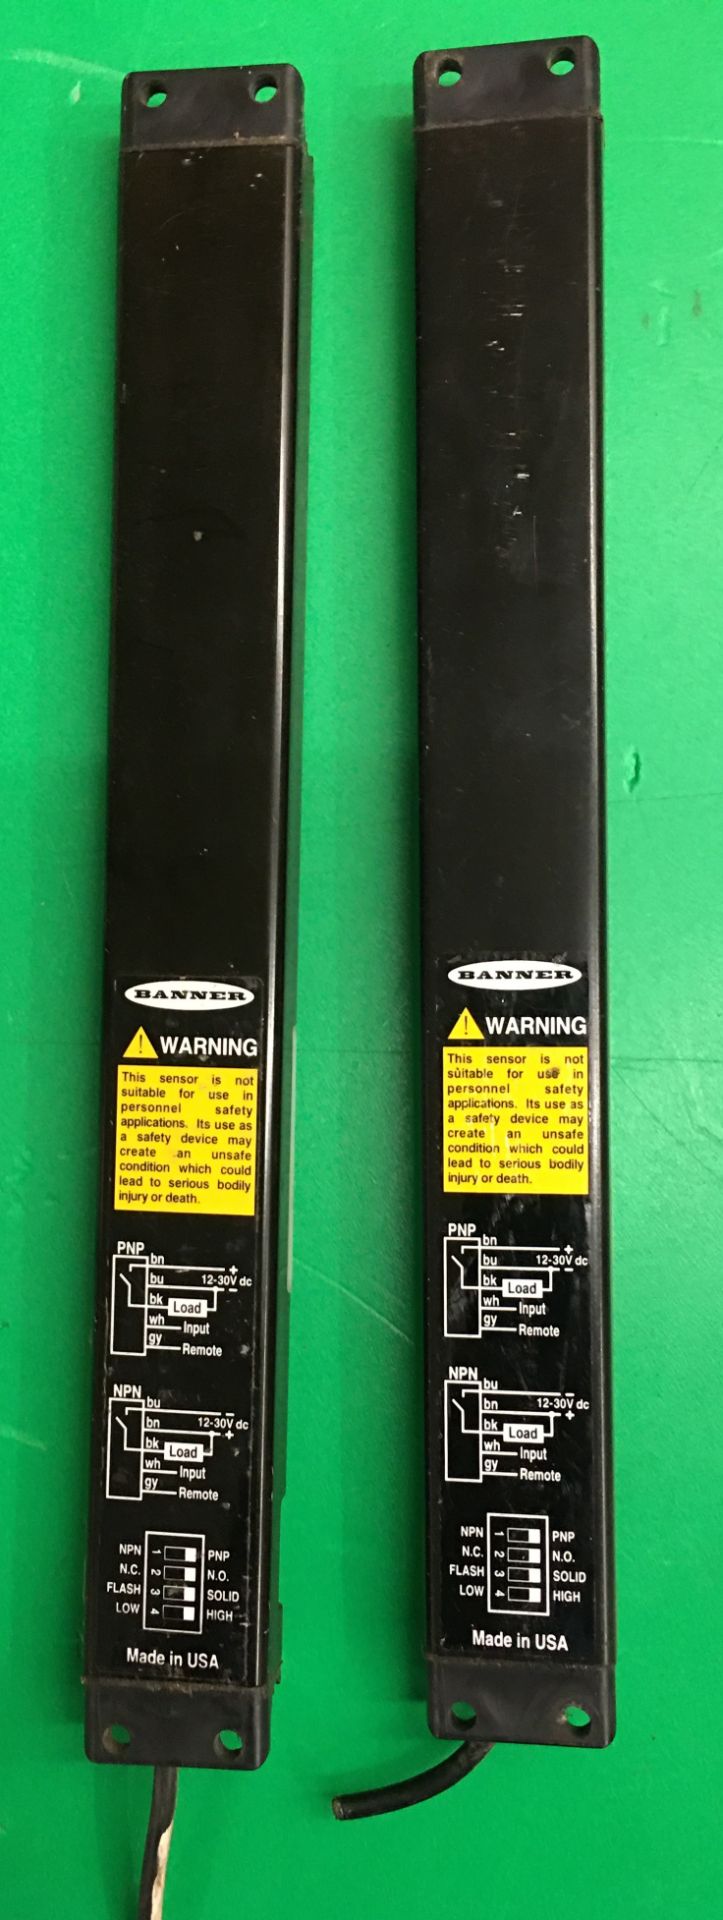 BANNER Engineering Photoelectric 2M QD 8 Channel / 5 Pin Pigtail, Lot of 2, Model PDV225Q, 12-30 VDC - Image 2 of 3